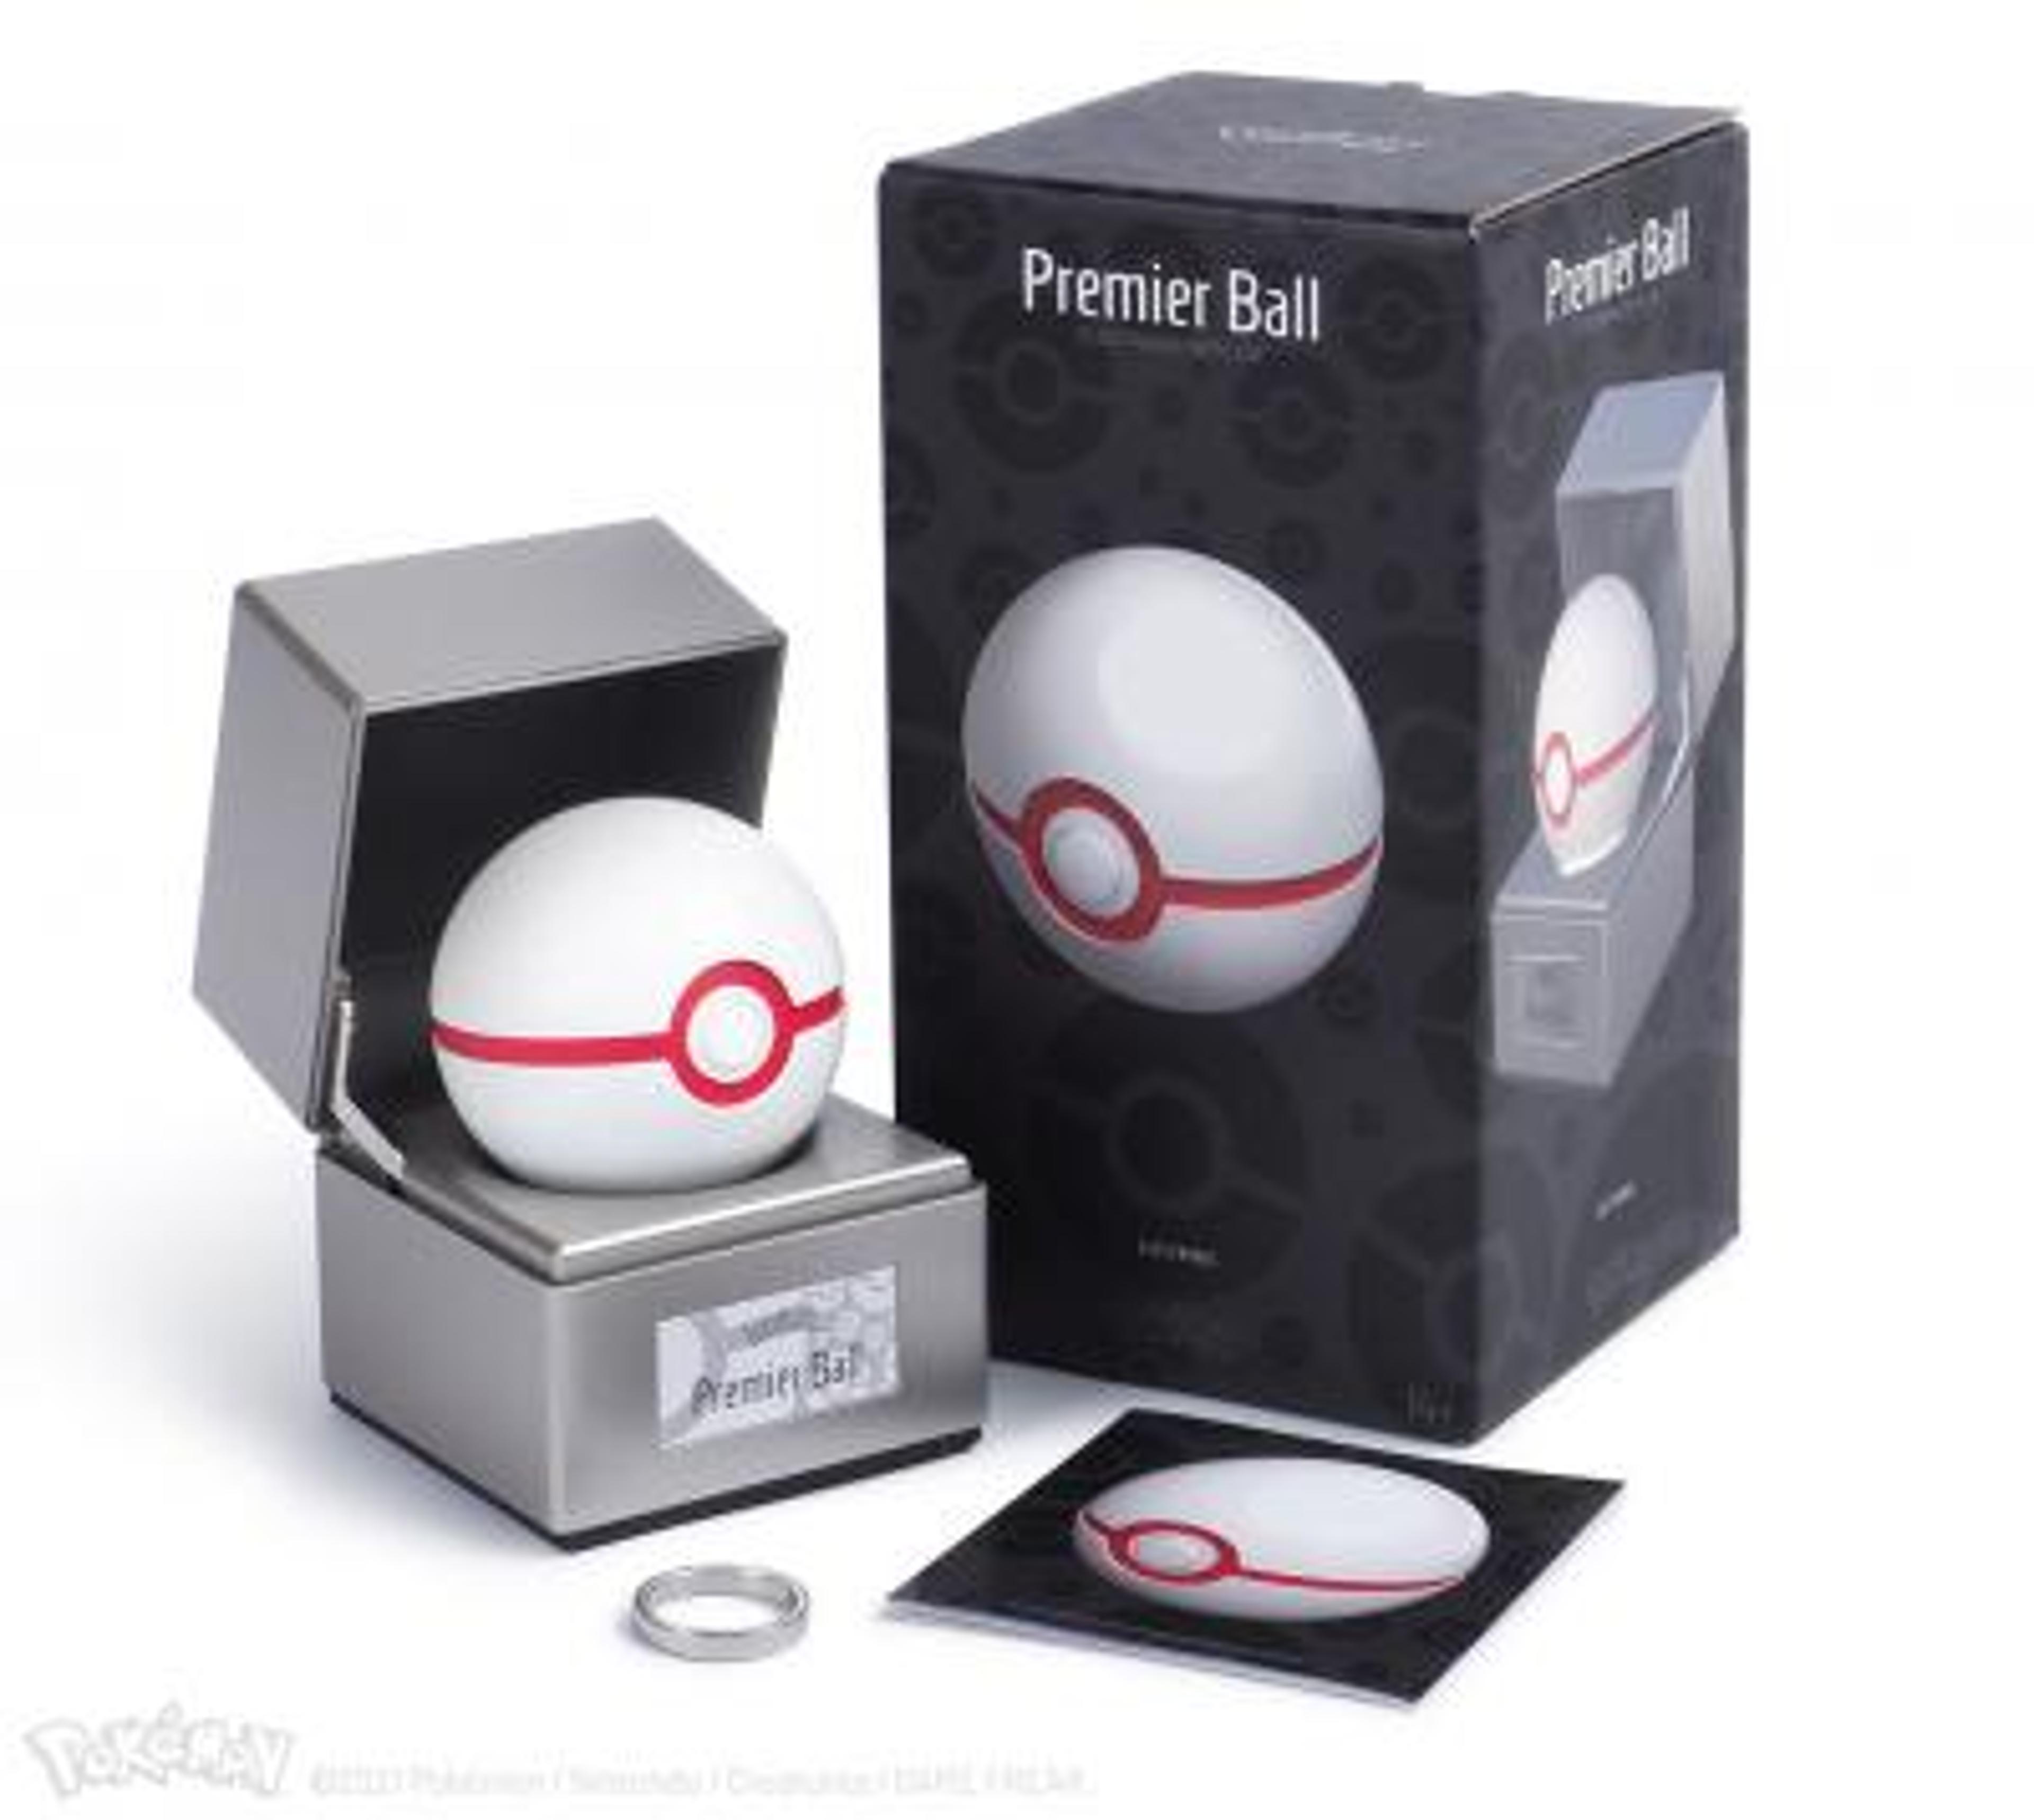 PREMIER BALL Replica by The Wand Company